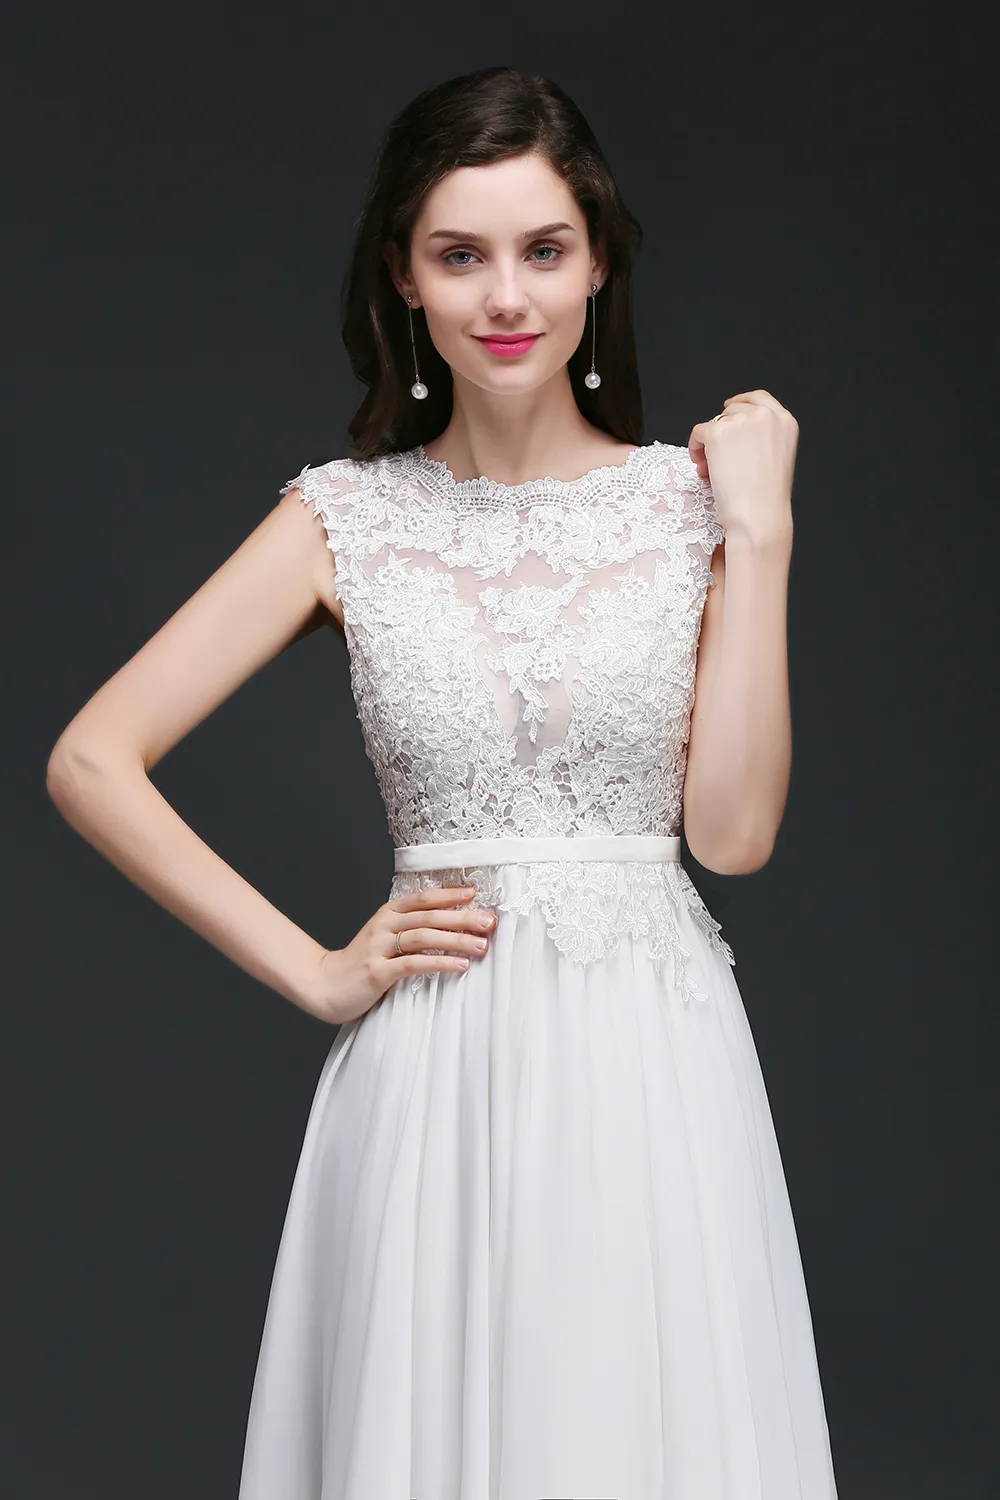 Cheap Flow Chiffon Country Wedding Dresses Lace Top A Line Garden Wedding Gowns Sexy Backless Beach Wedding Party Dresses Robe CPS747